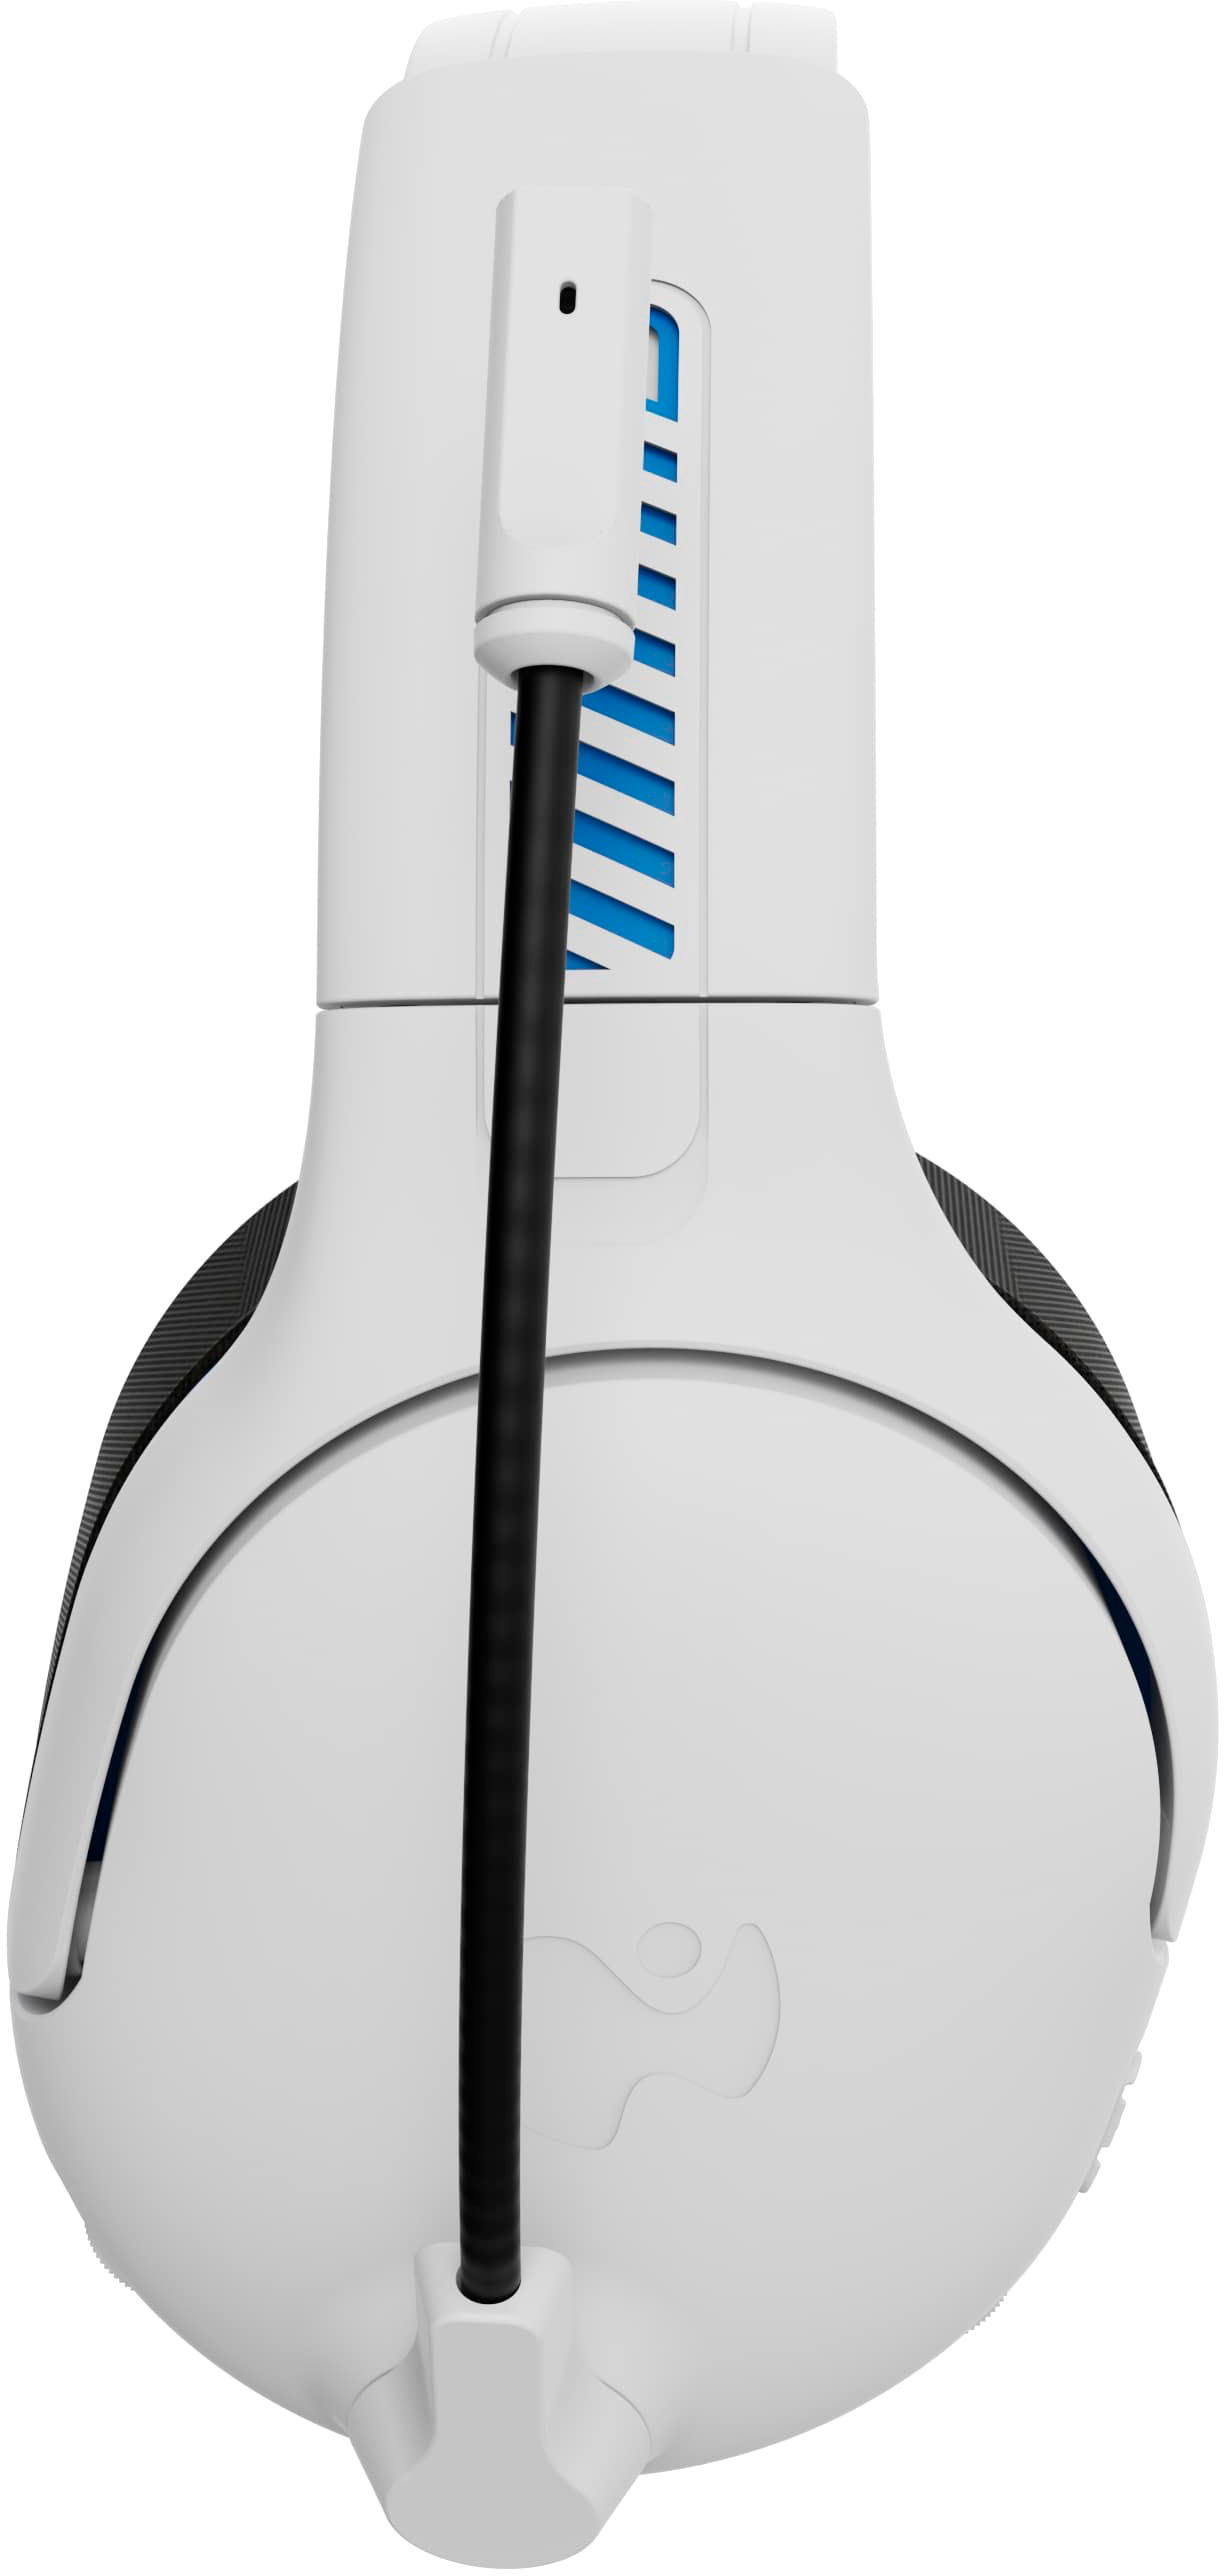 PDP AIRLITE Pro Wireless Gaming Headset for PS5, PS4 Frost White